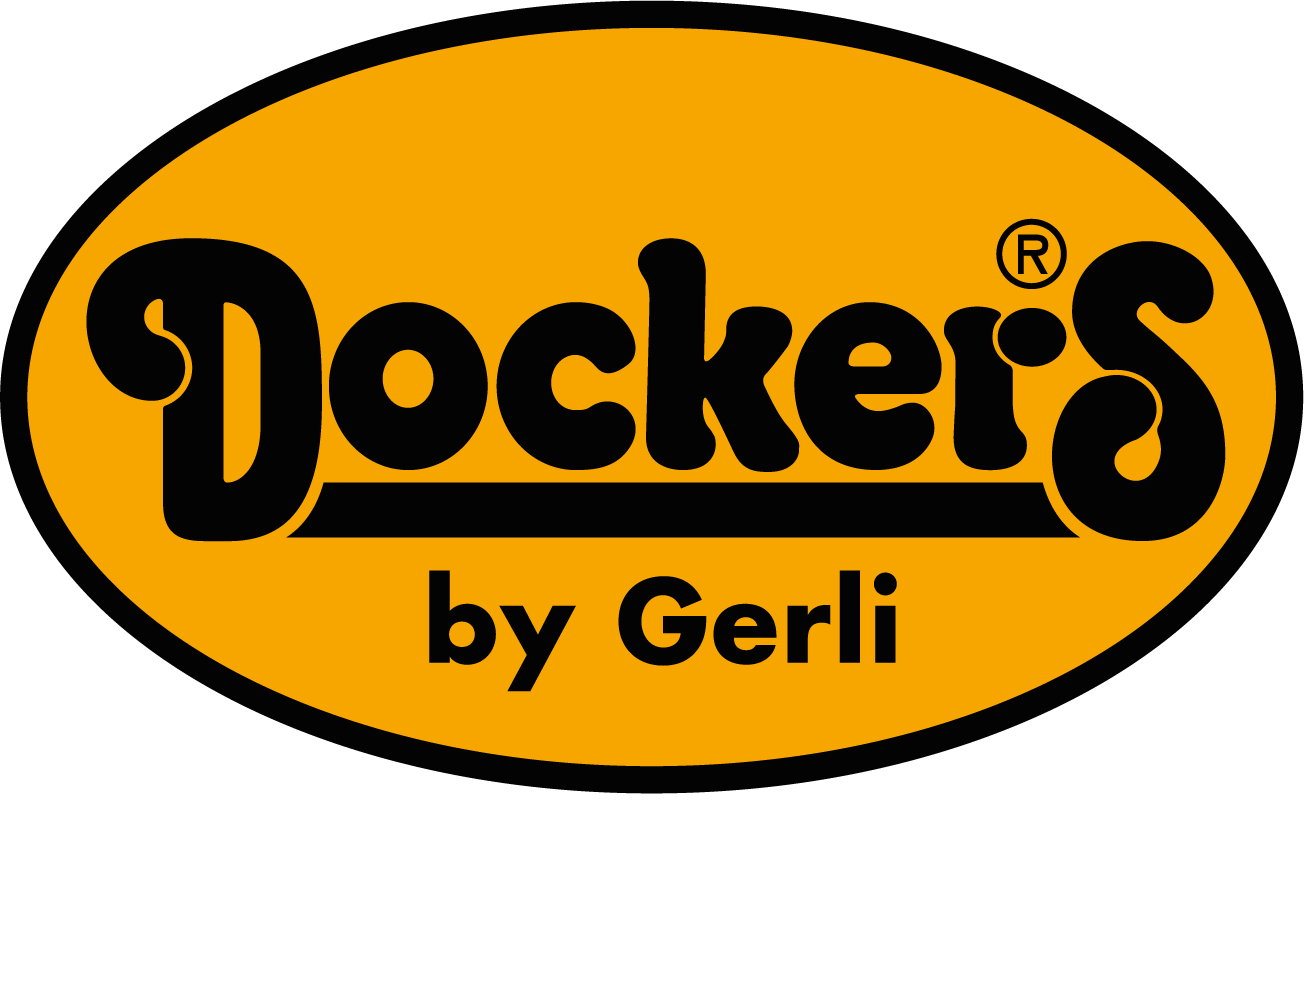 Dockers by Gerli 45sv704 Chaussures Bottes Bottes D'Hiver Neige Boot 45sv704-700100 